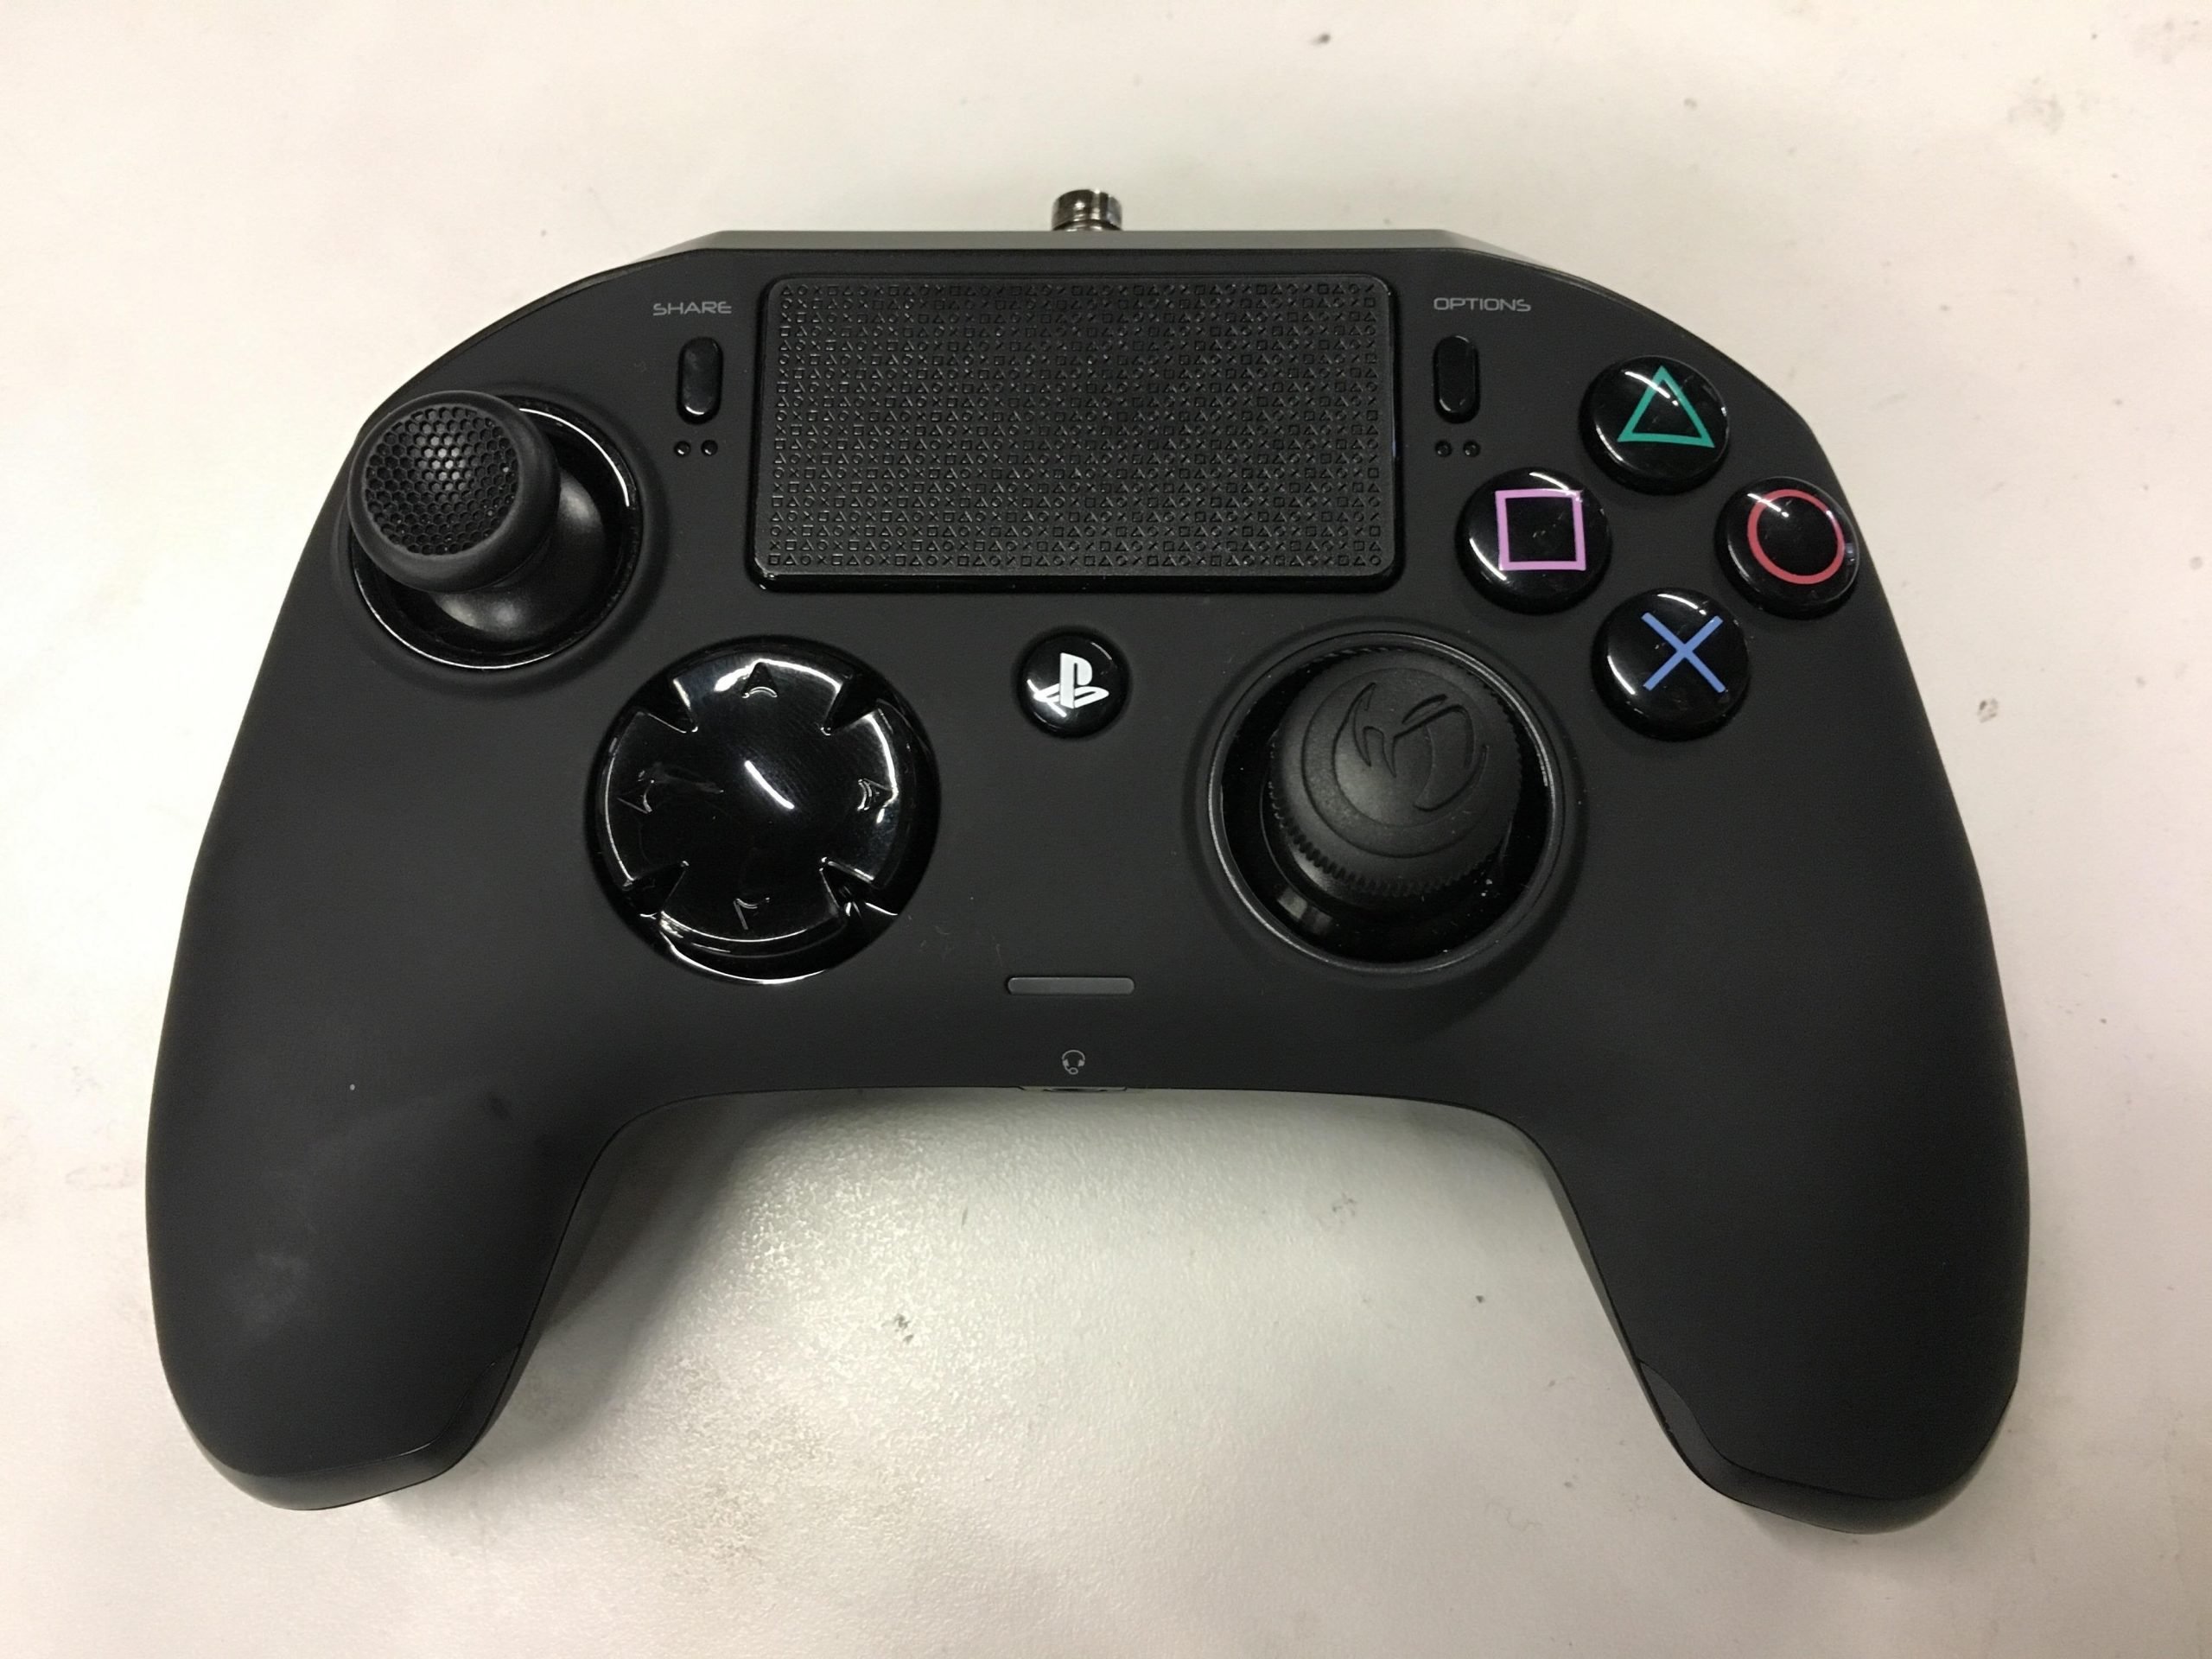 A PS4 controller designed like an Xbox controller : mildlyinteresting